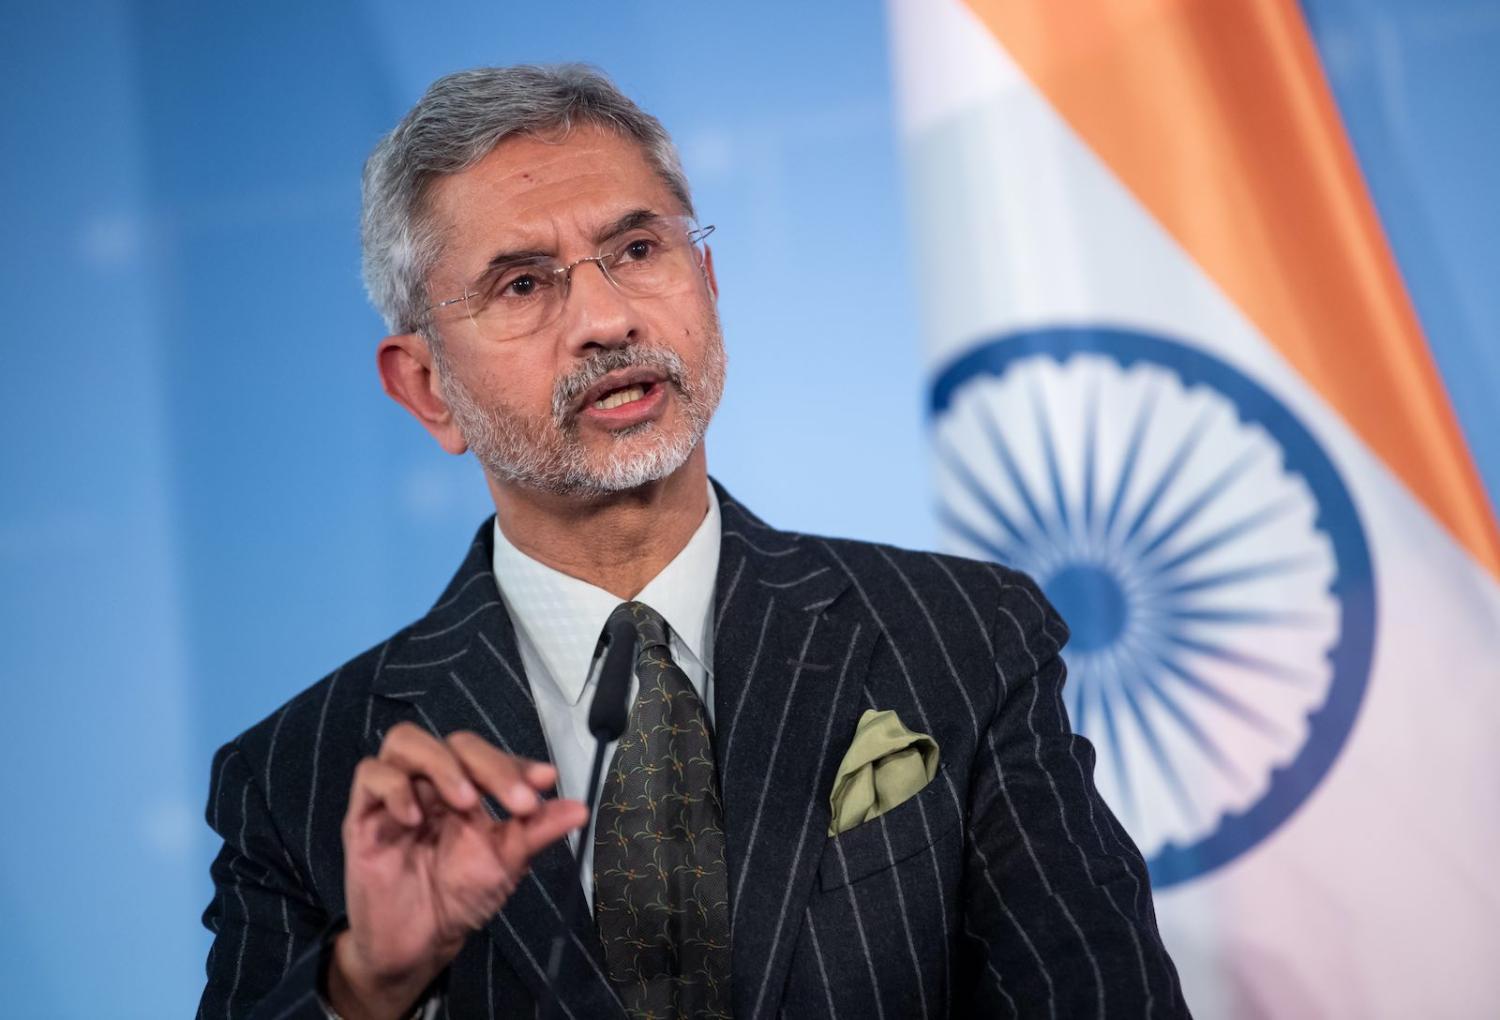 Subrahmanyam Jaishankar, Foreign Minister of India, at a press conference in Berlin in February this year (Bernd von Jutrczenka/picture alliance via Getty Images)